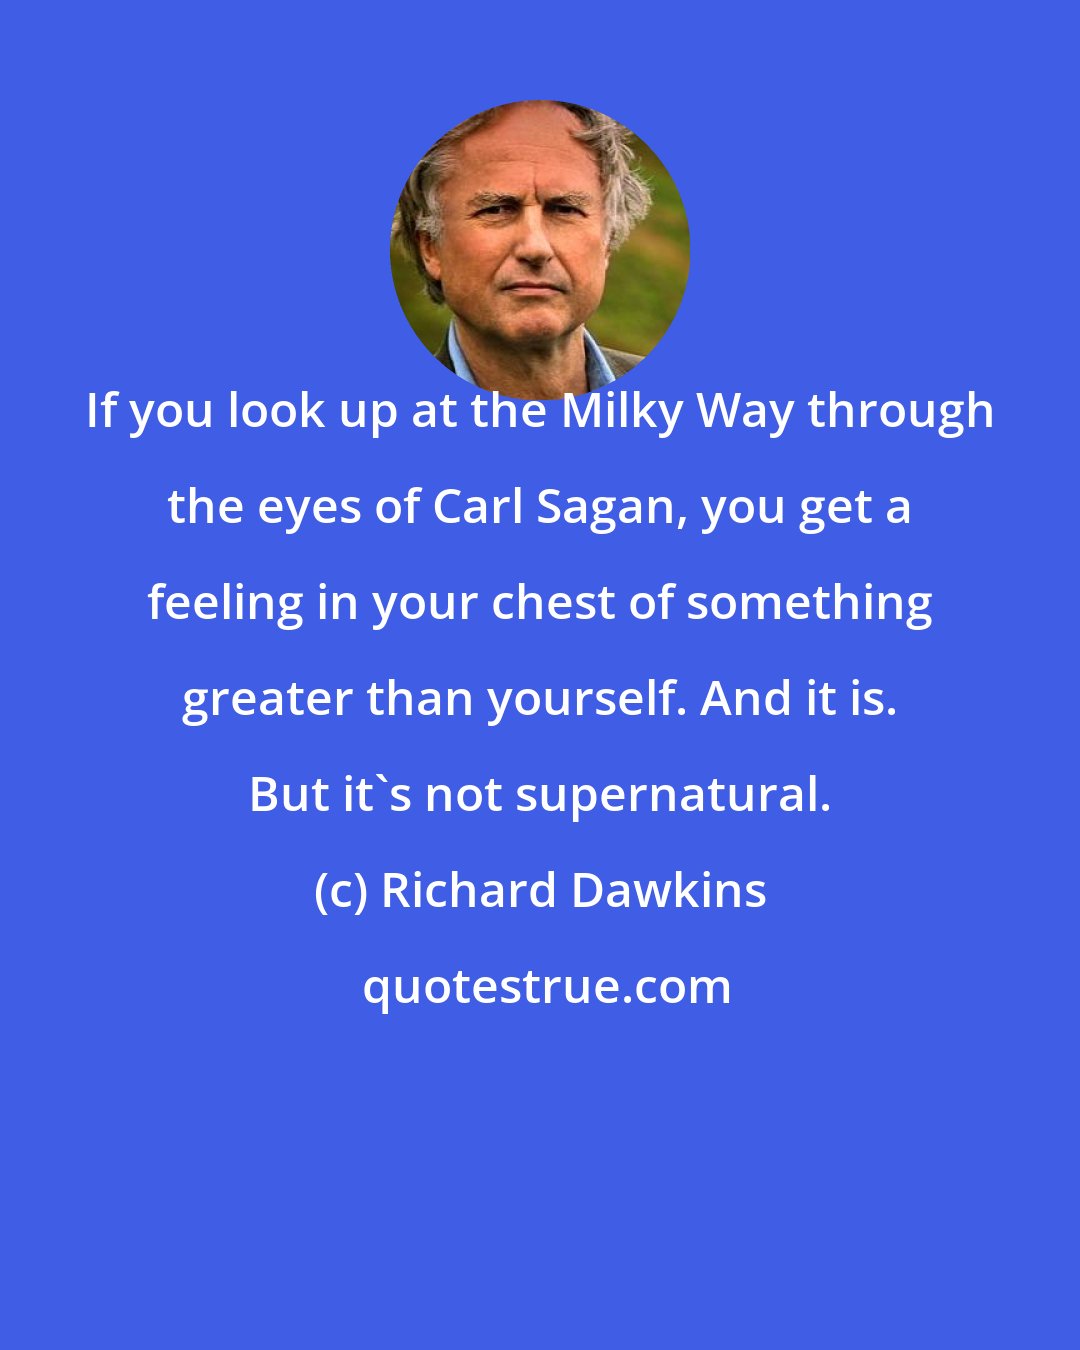 Richard Dawkins: If you look up at the Milky Way through the eyes of Carl Sagan, you get a feeling in your chest of something greater than yourself. And it is. But it's not supernatural.